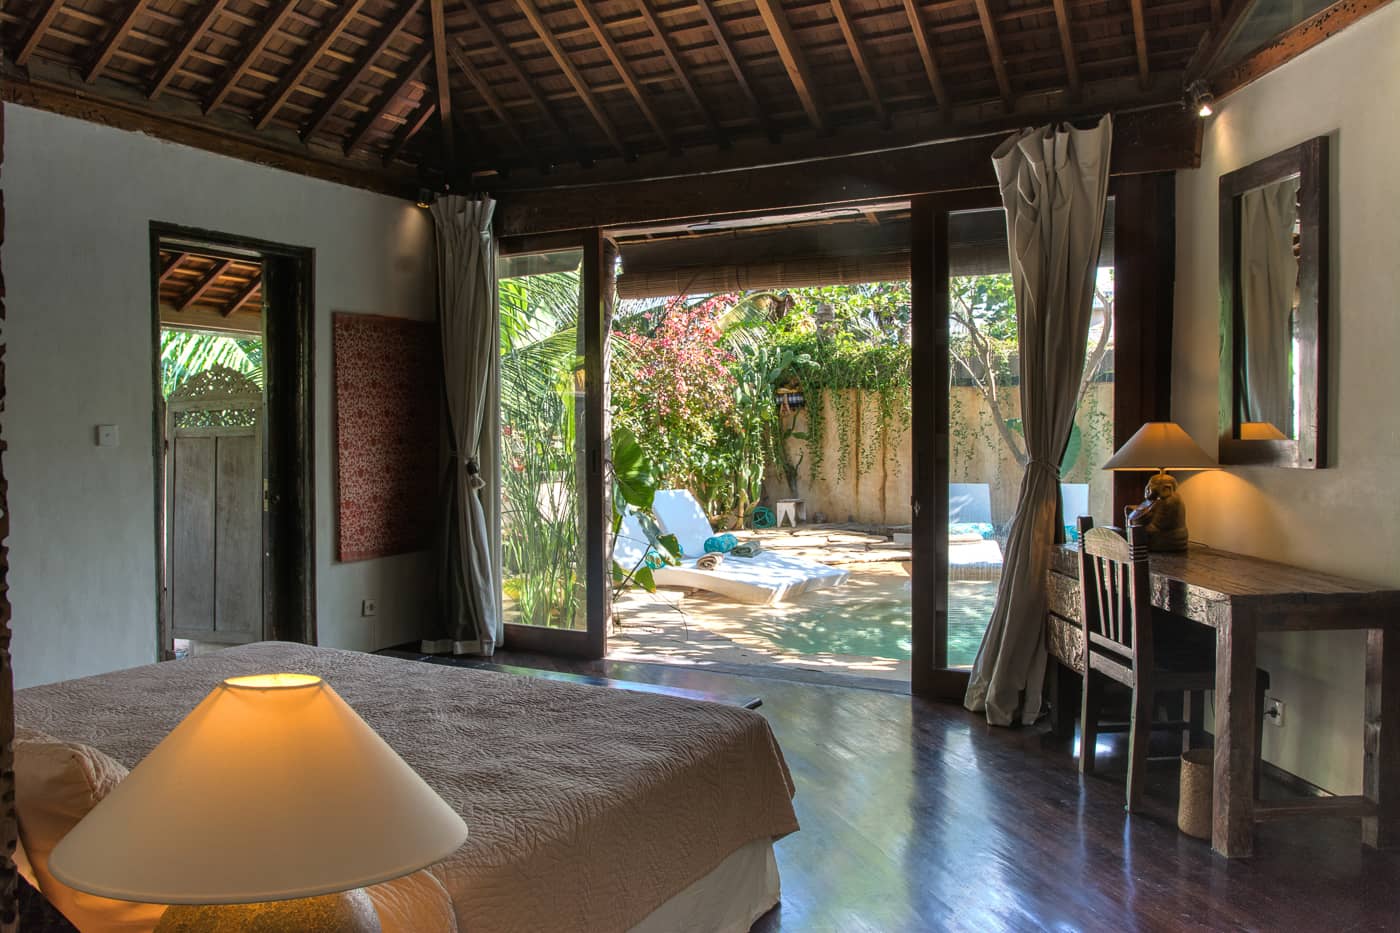 property details photo for Phinisi Villas Bali